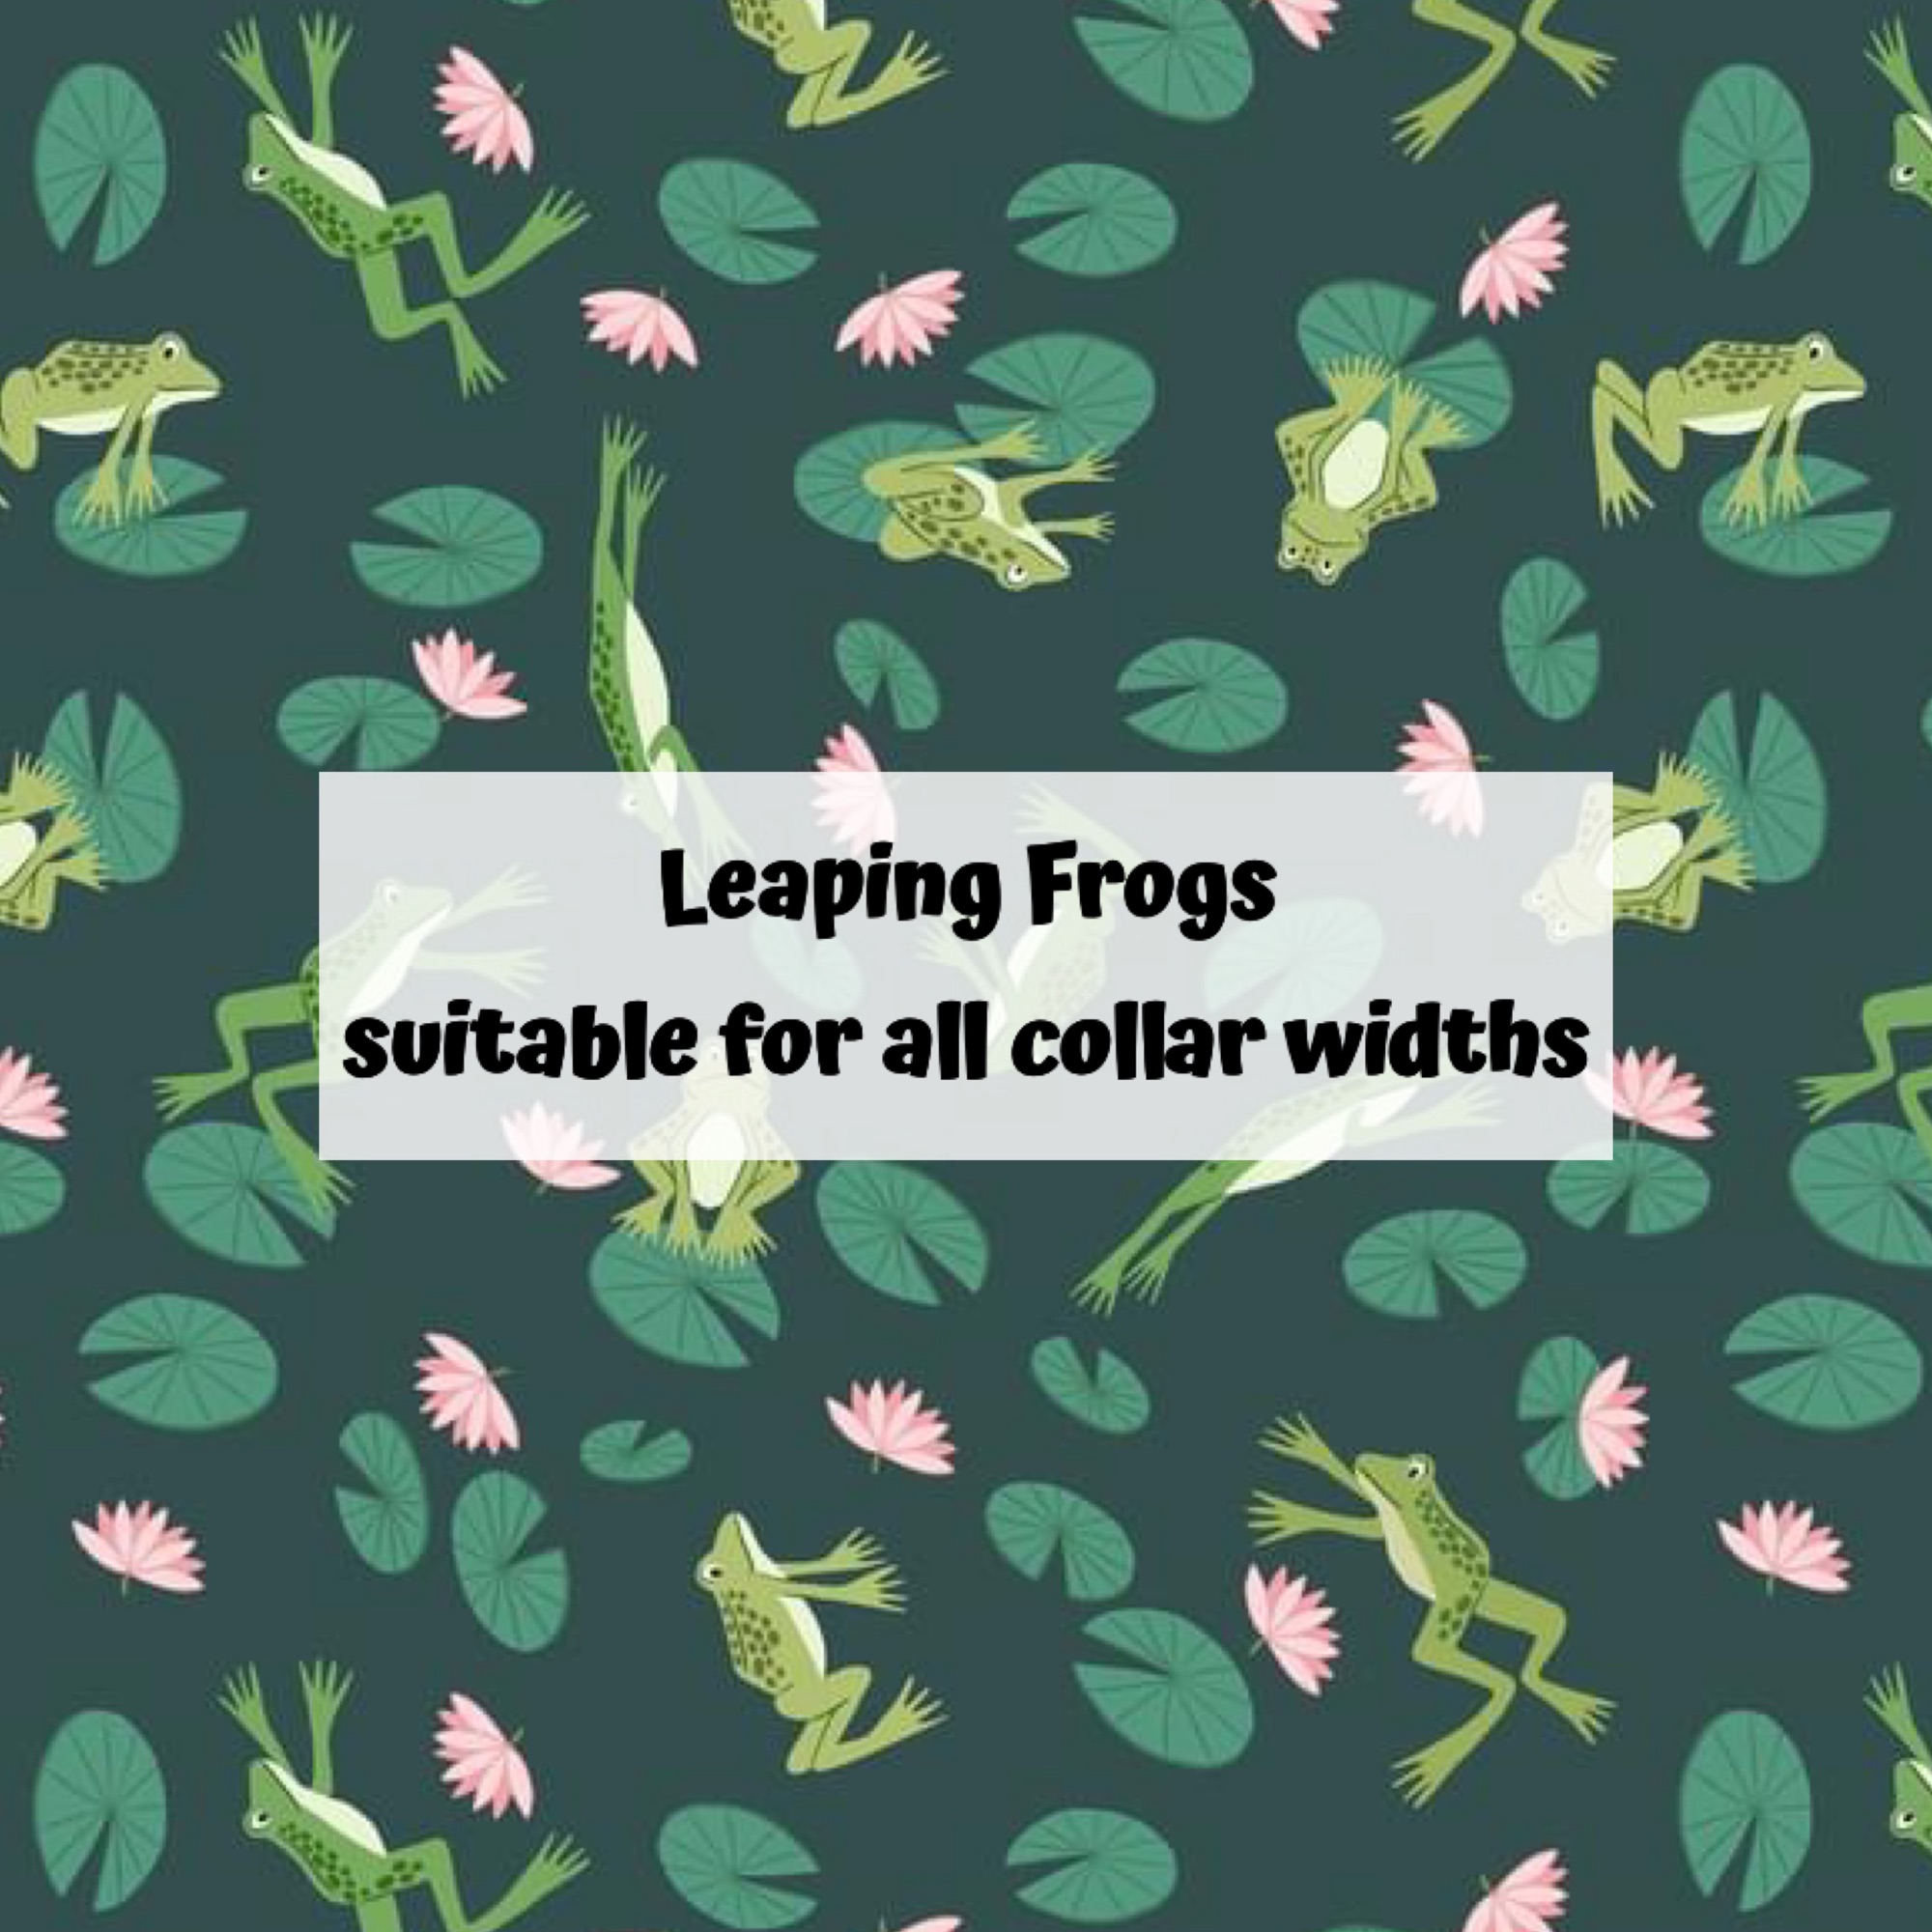 Leapings Frogs